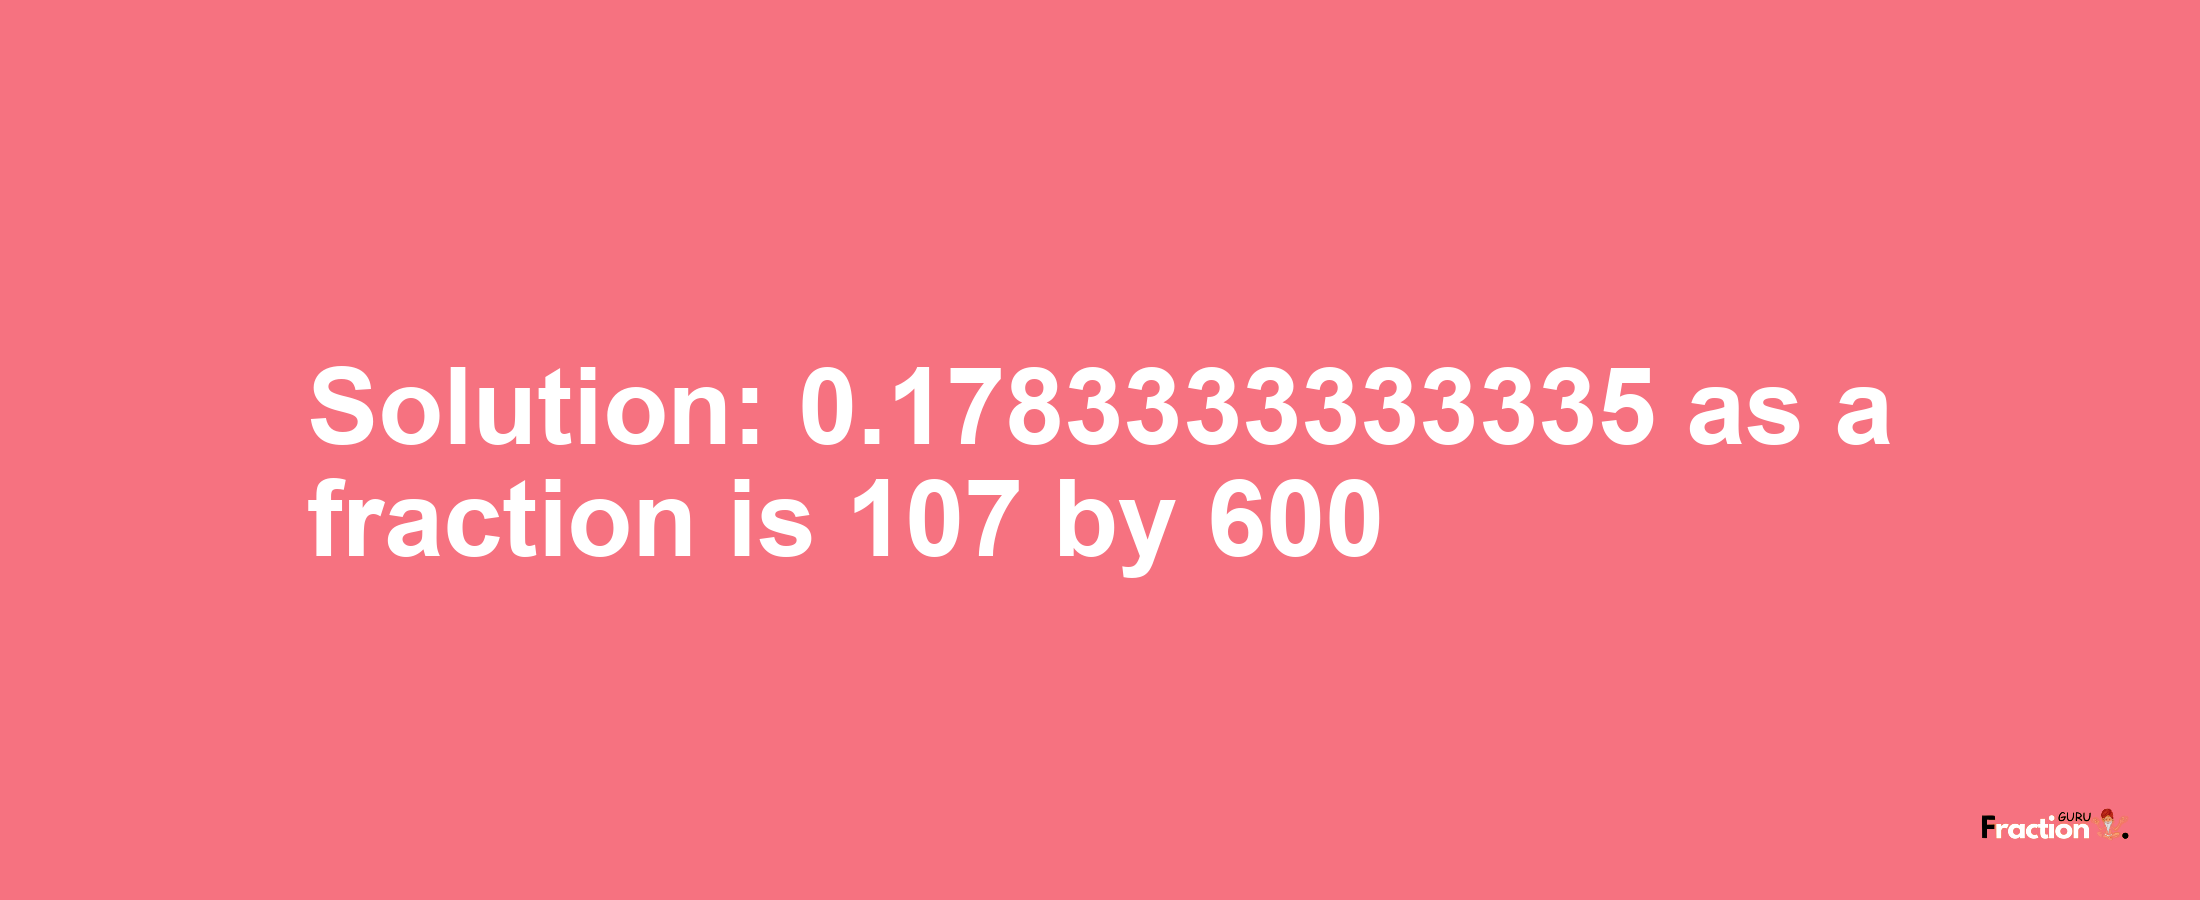 Solution:0.1783333333335 as a fraction is 107/600